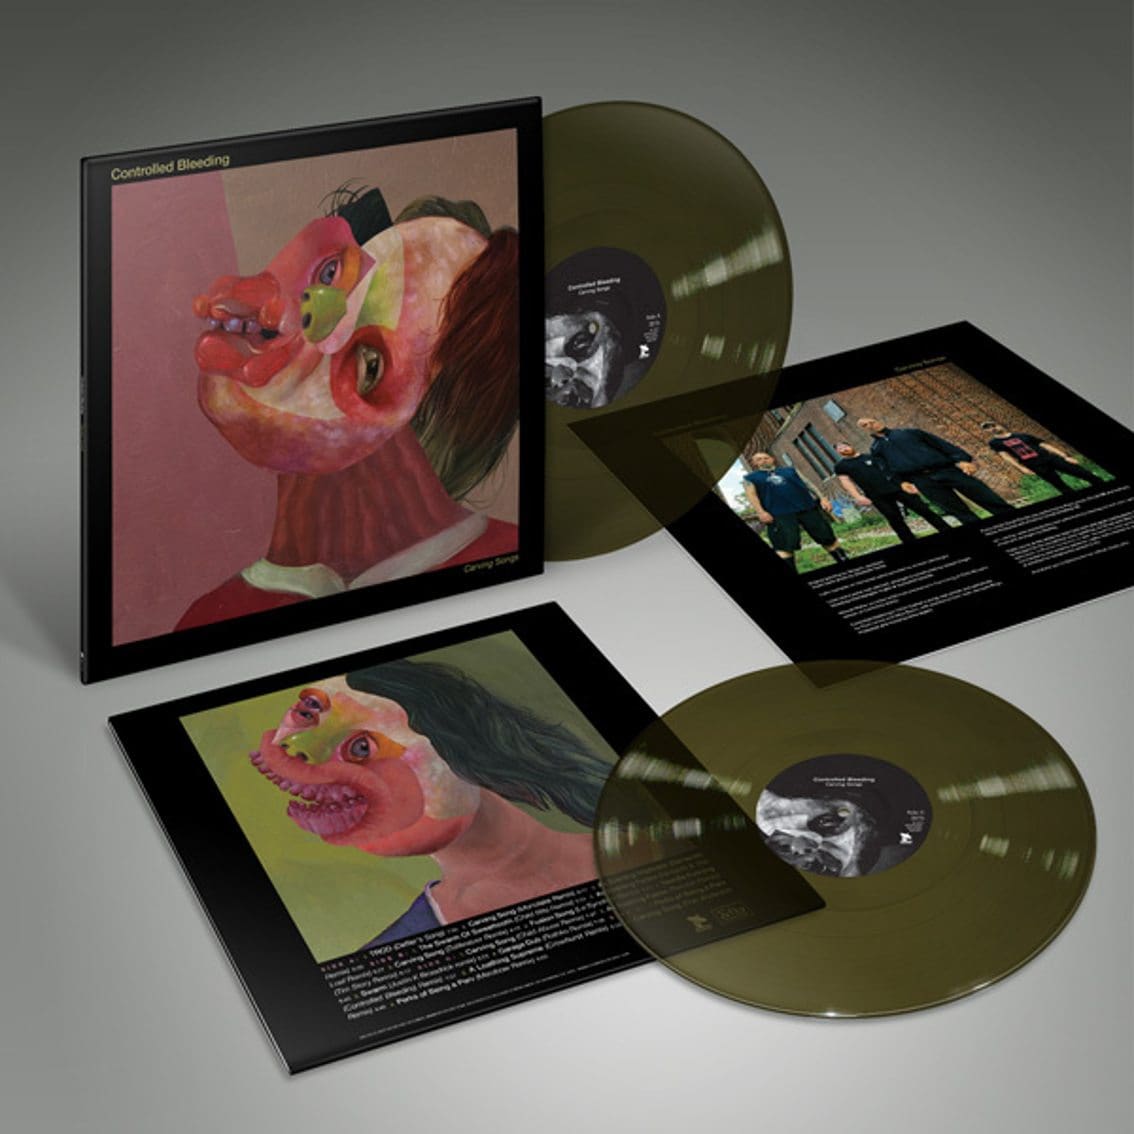 Controlled Bleeding sees remix album'Carving songs' released in late August incl. new track + vinyl editions - order now